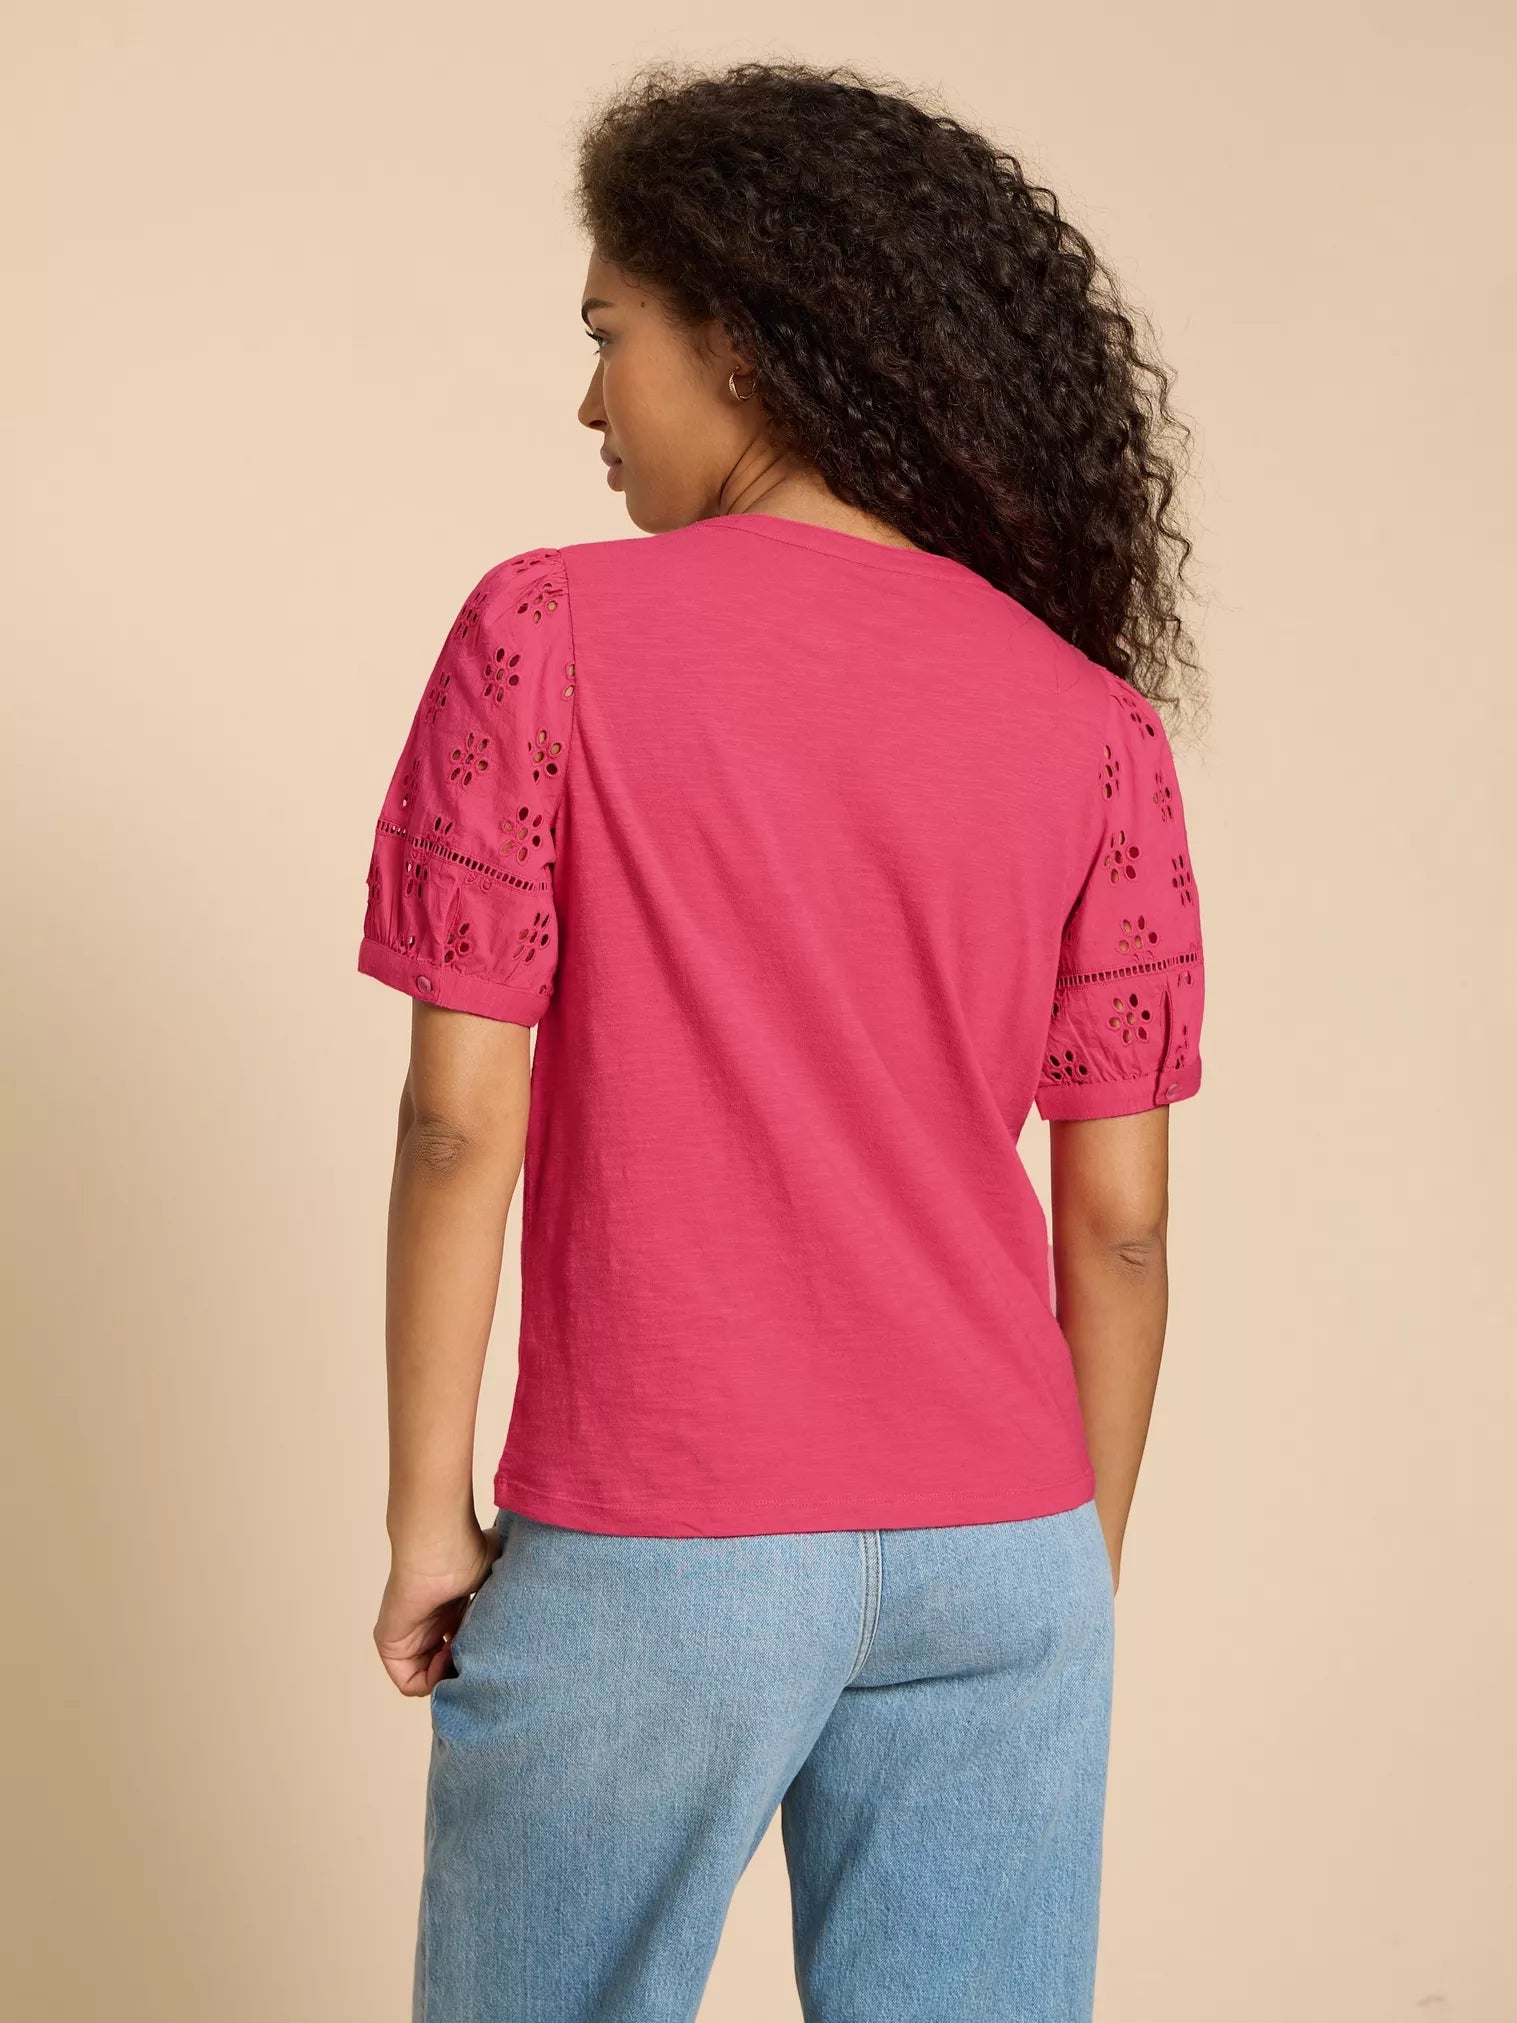 White Stuff Bella Broderie Mix Top Mid Pink